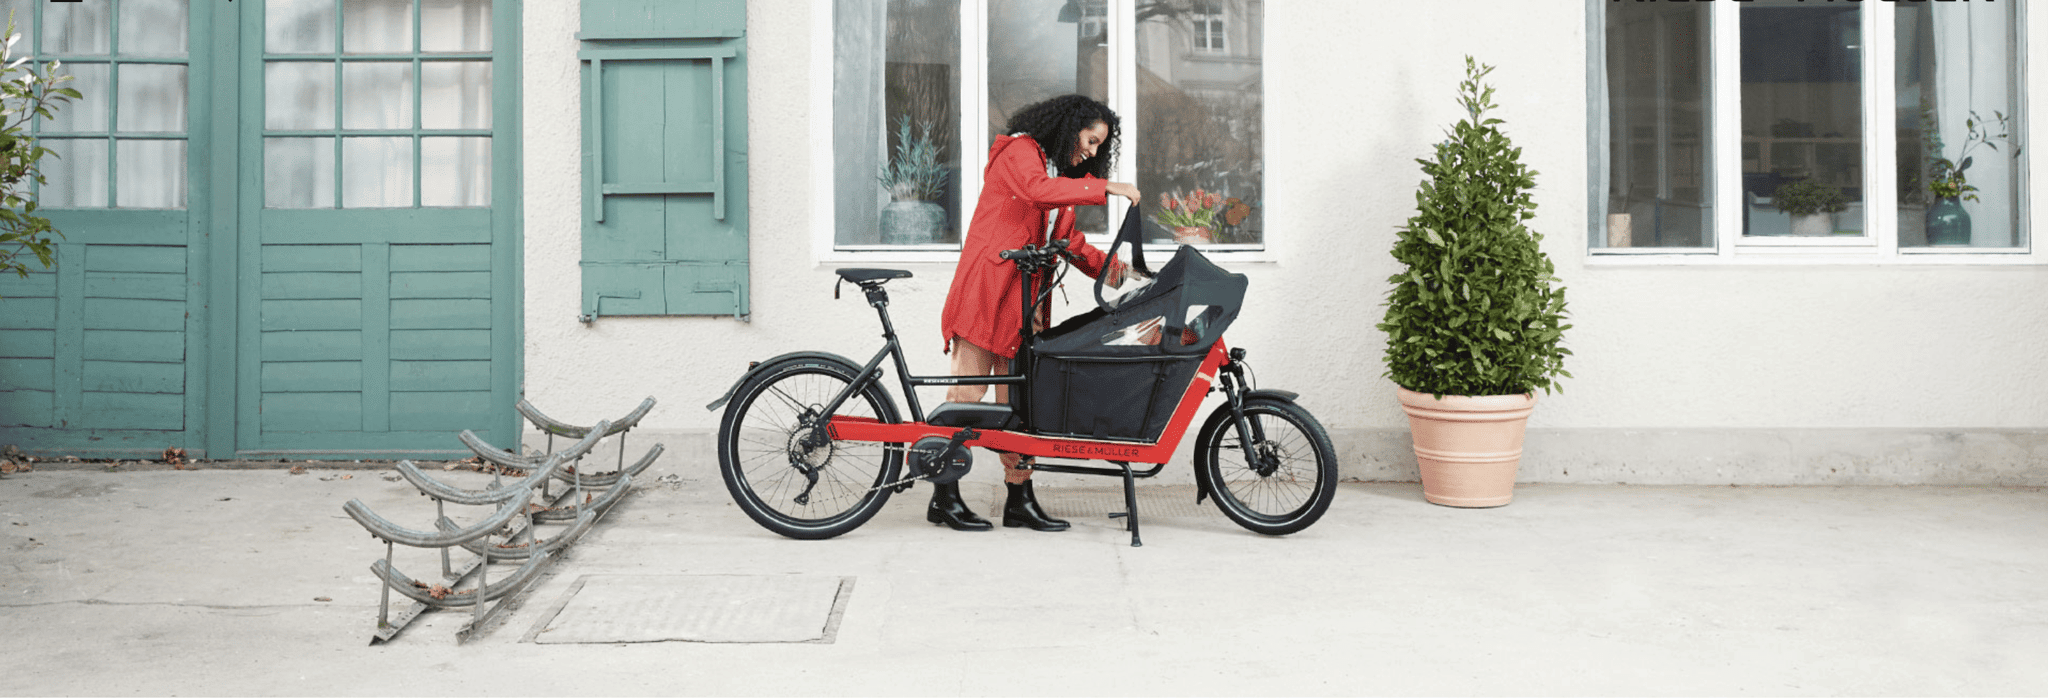 Back To School With Family Cargo Bikes